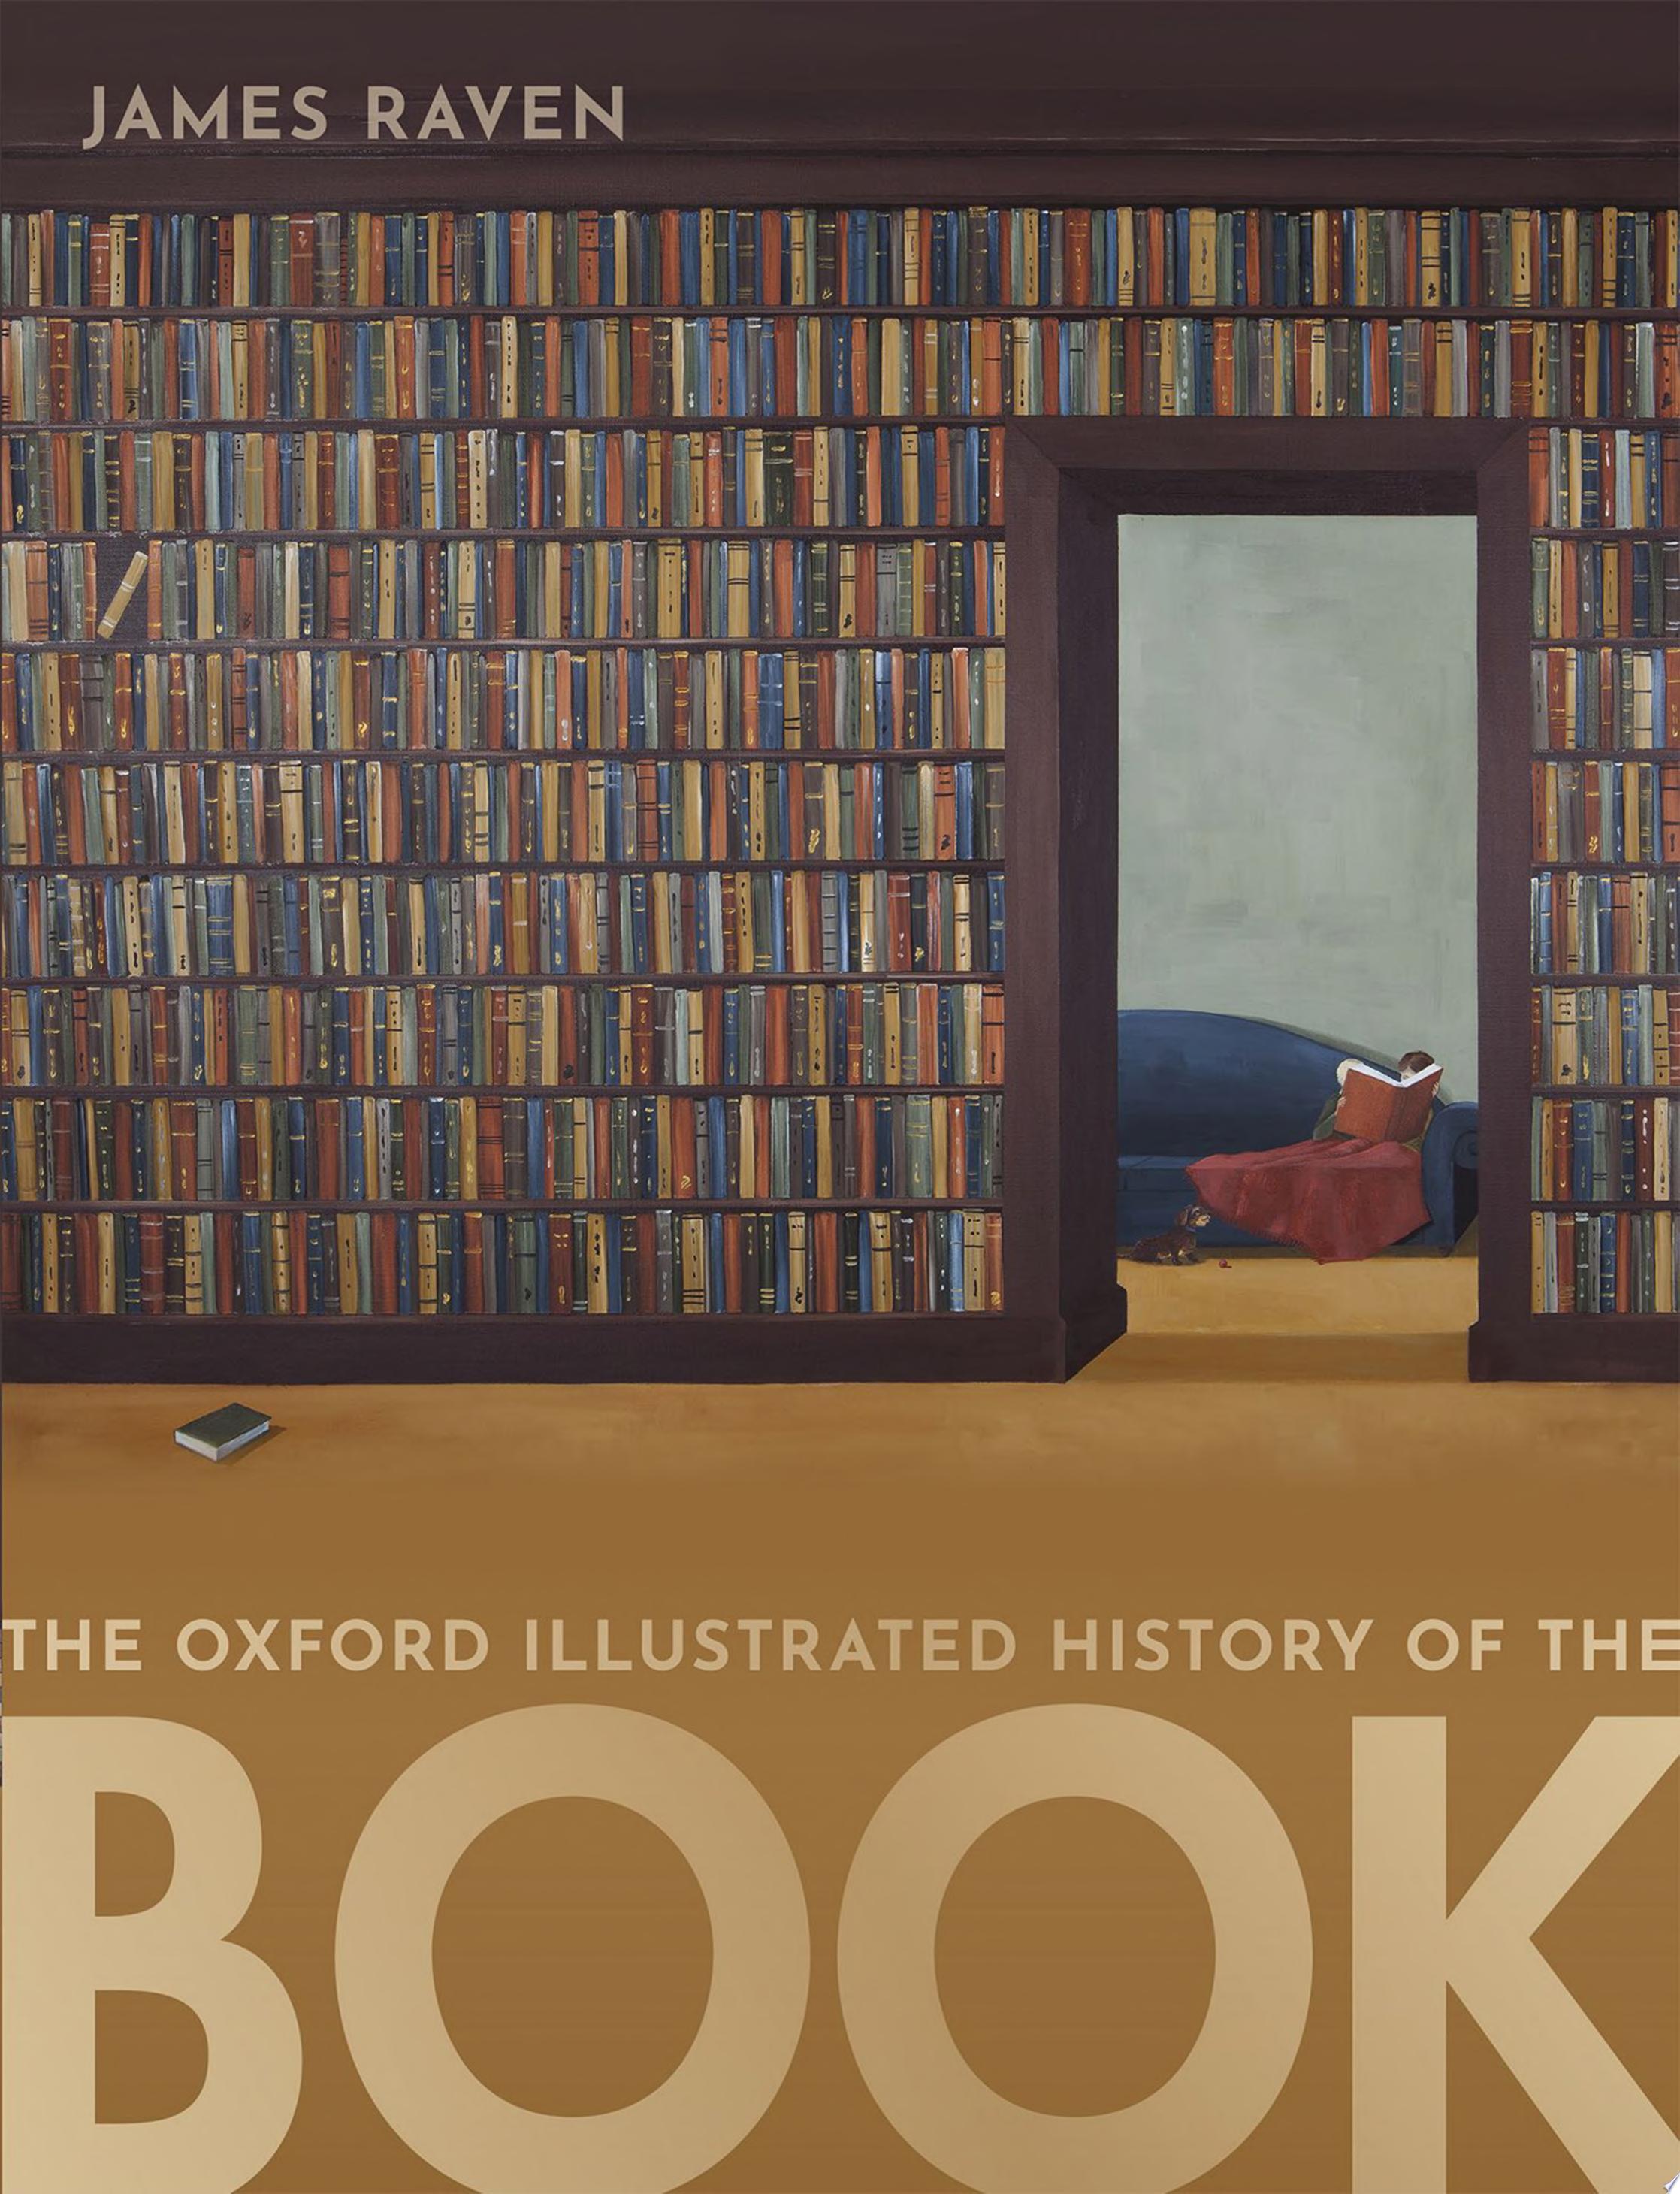 Image for "The Oxford Illustrated History of the Book"